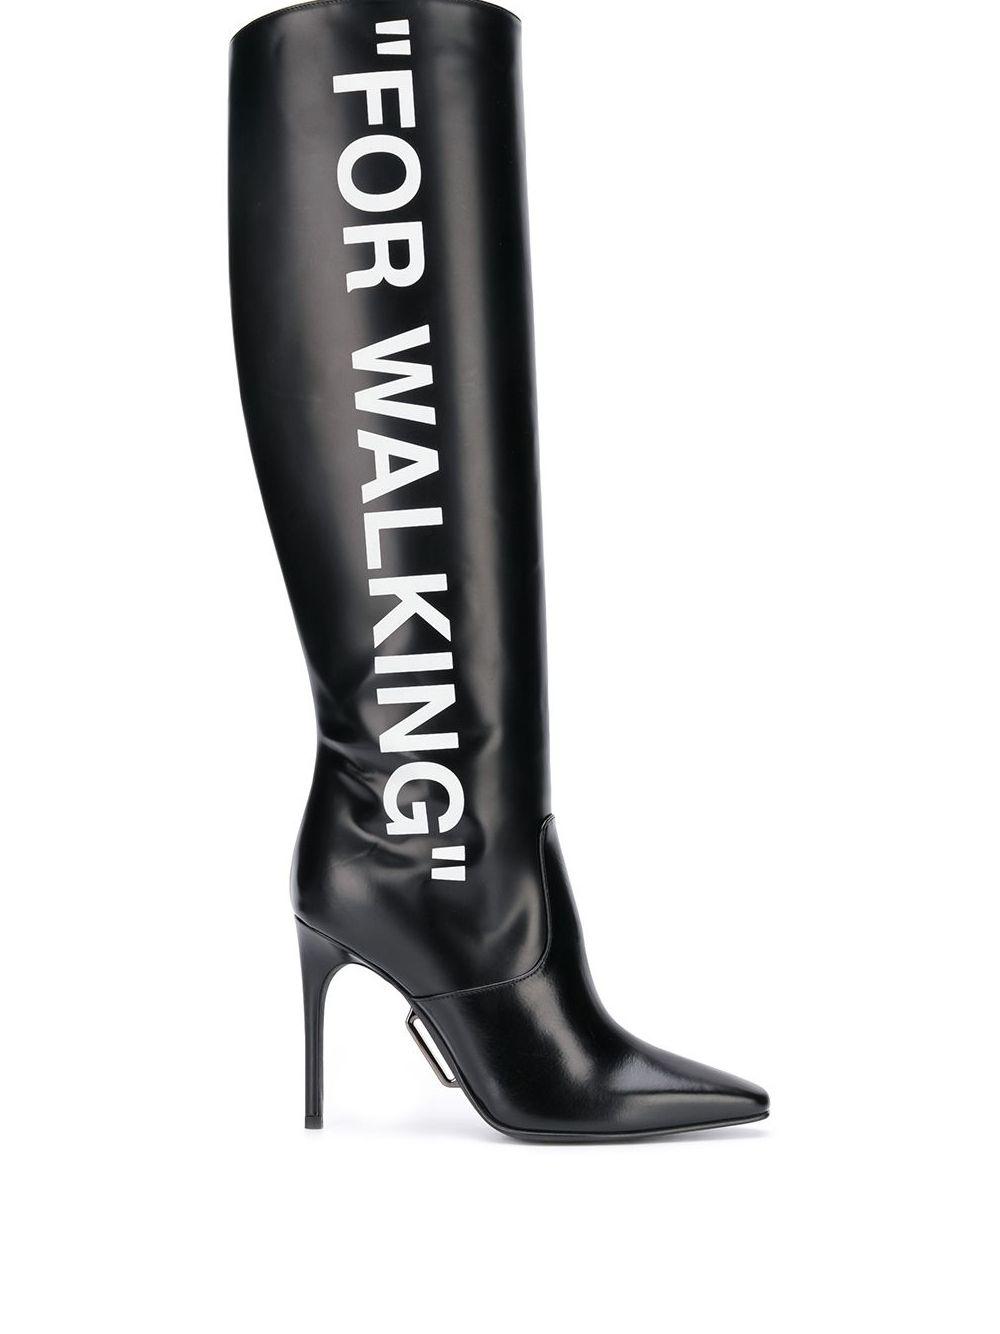 Off-White c/o Virgil Abloh For Walking Knee High Boots in Black | Lyst